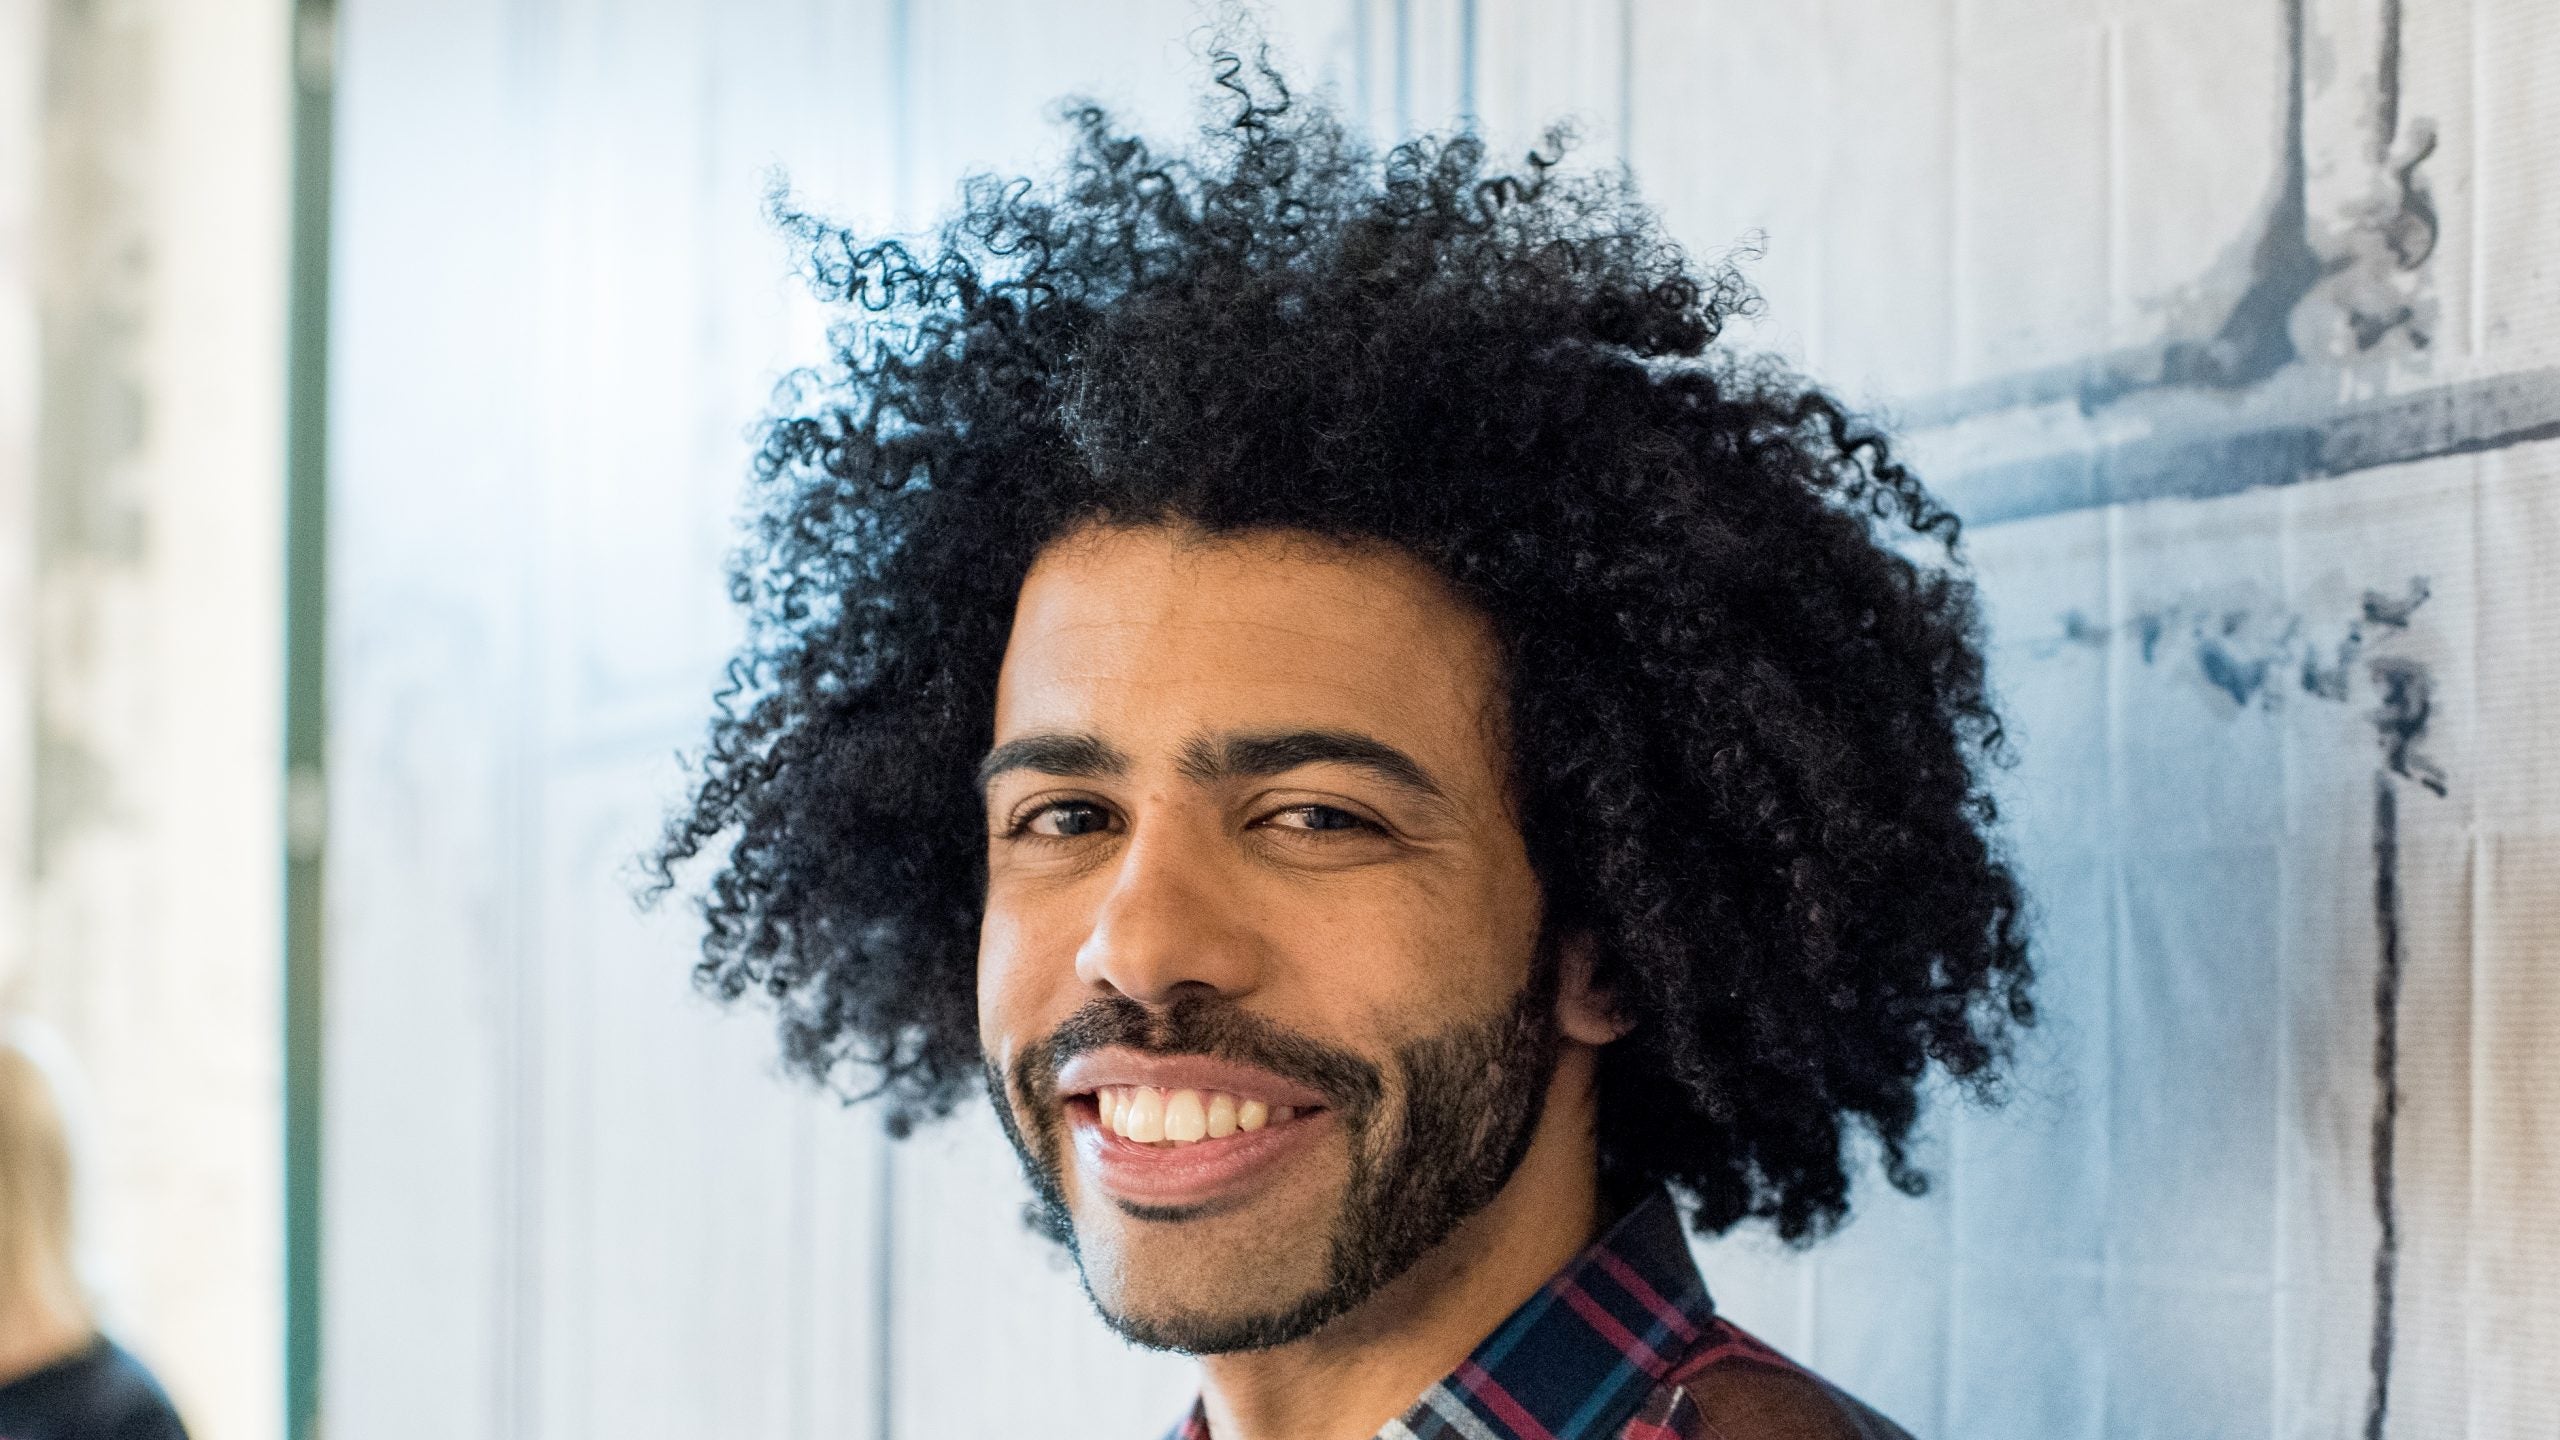 Snowpiercer's Daveed Diggs Likes A Challenge